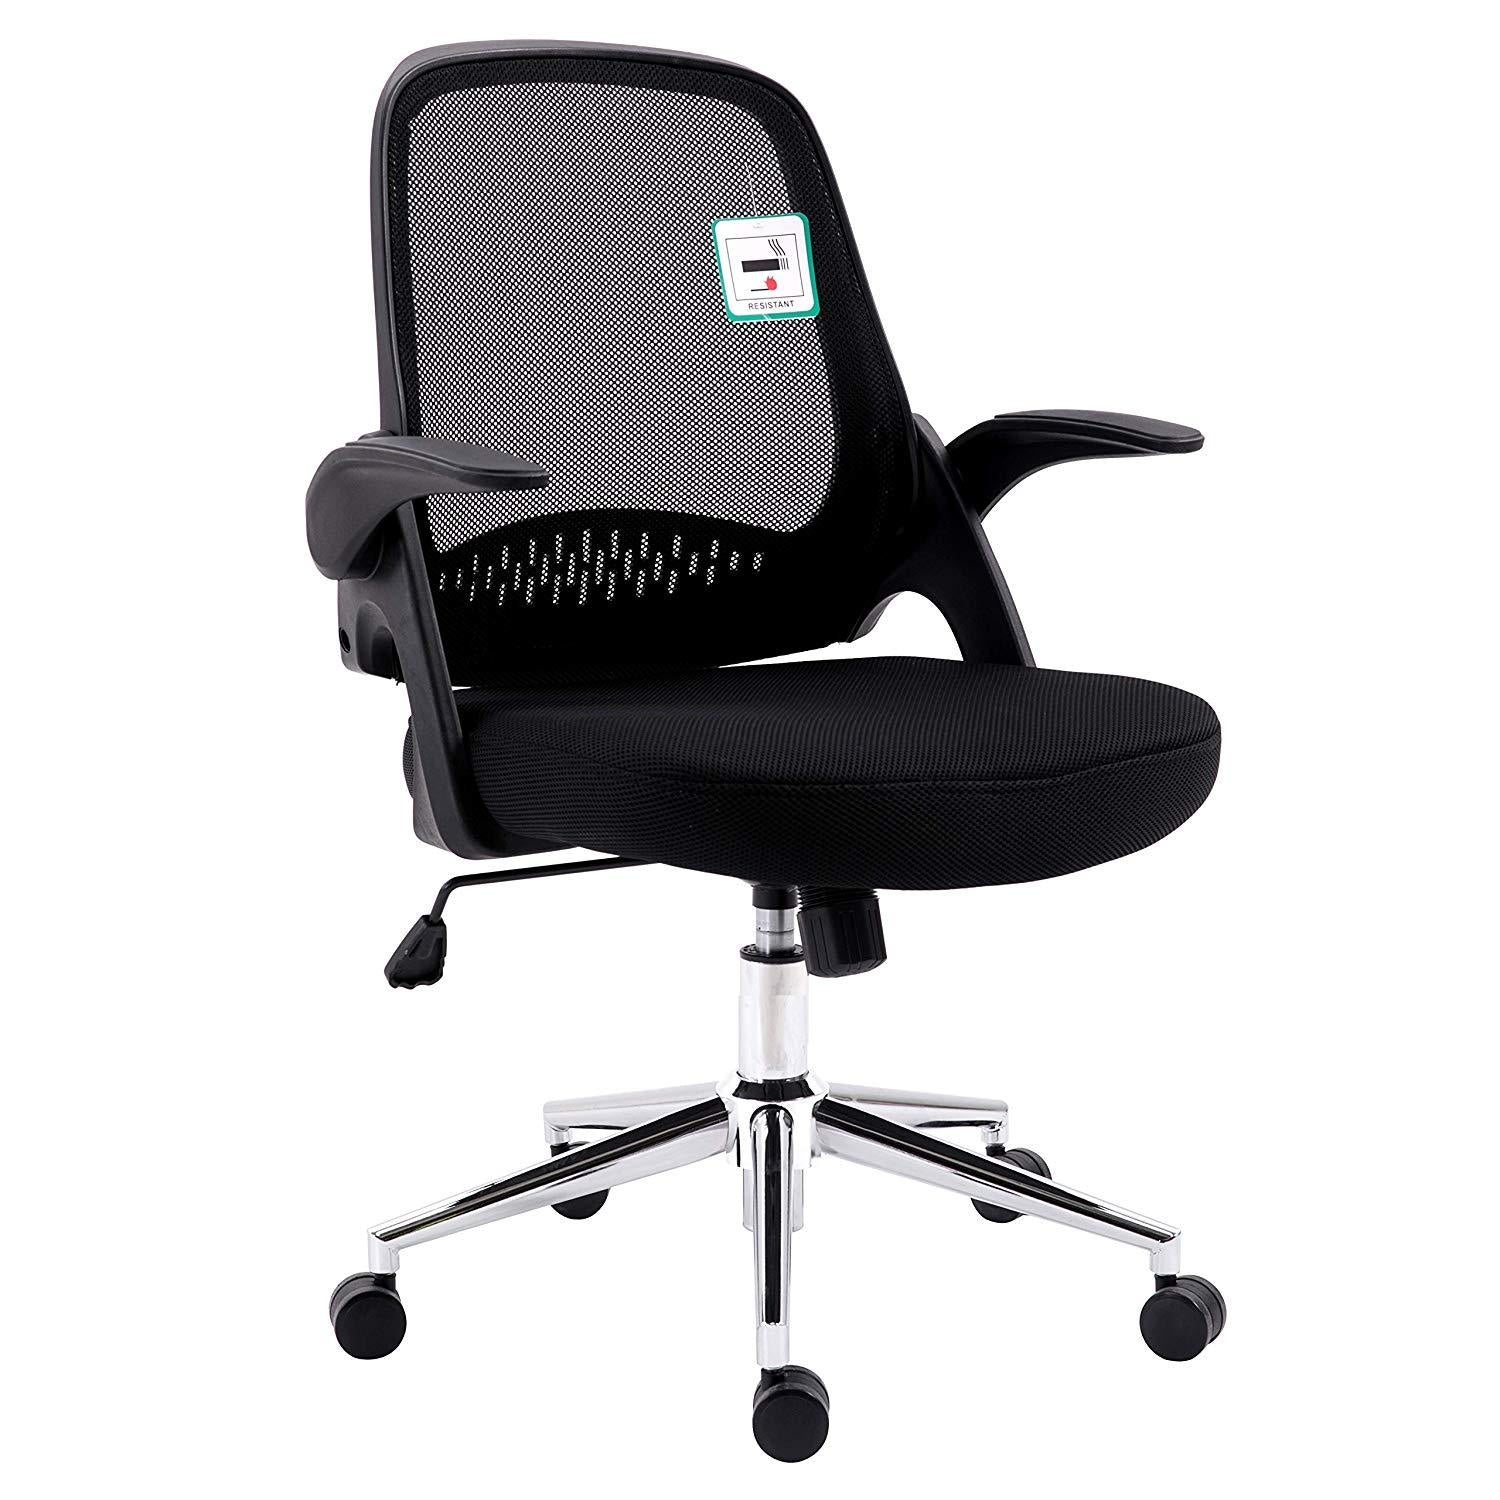 Mesh Fabric Swivel Office Chair Computer Desk Chair with Adjustable Armrests & Chrome Base, Black